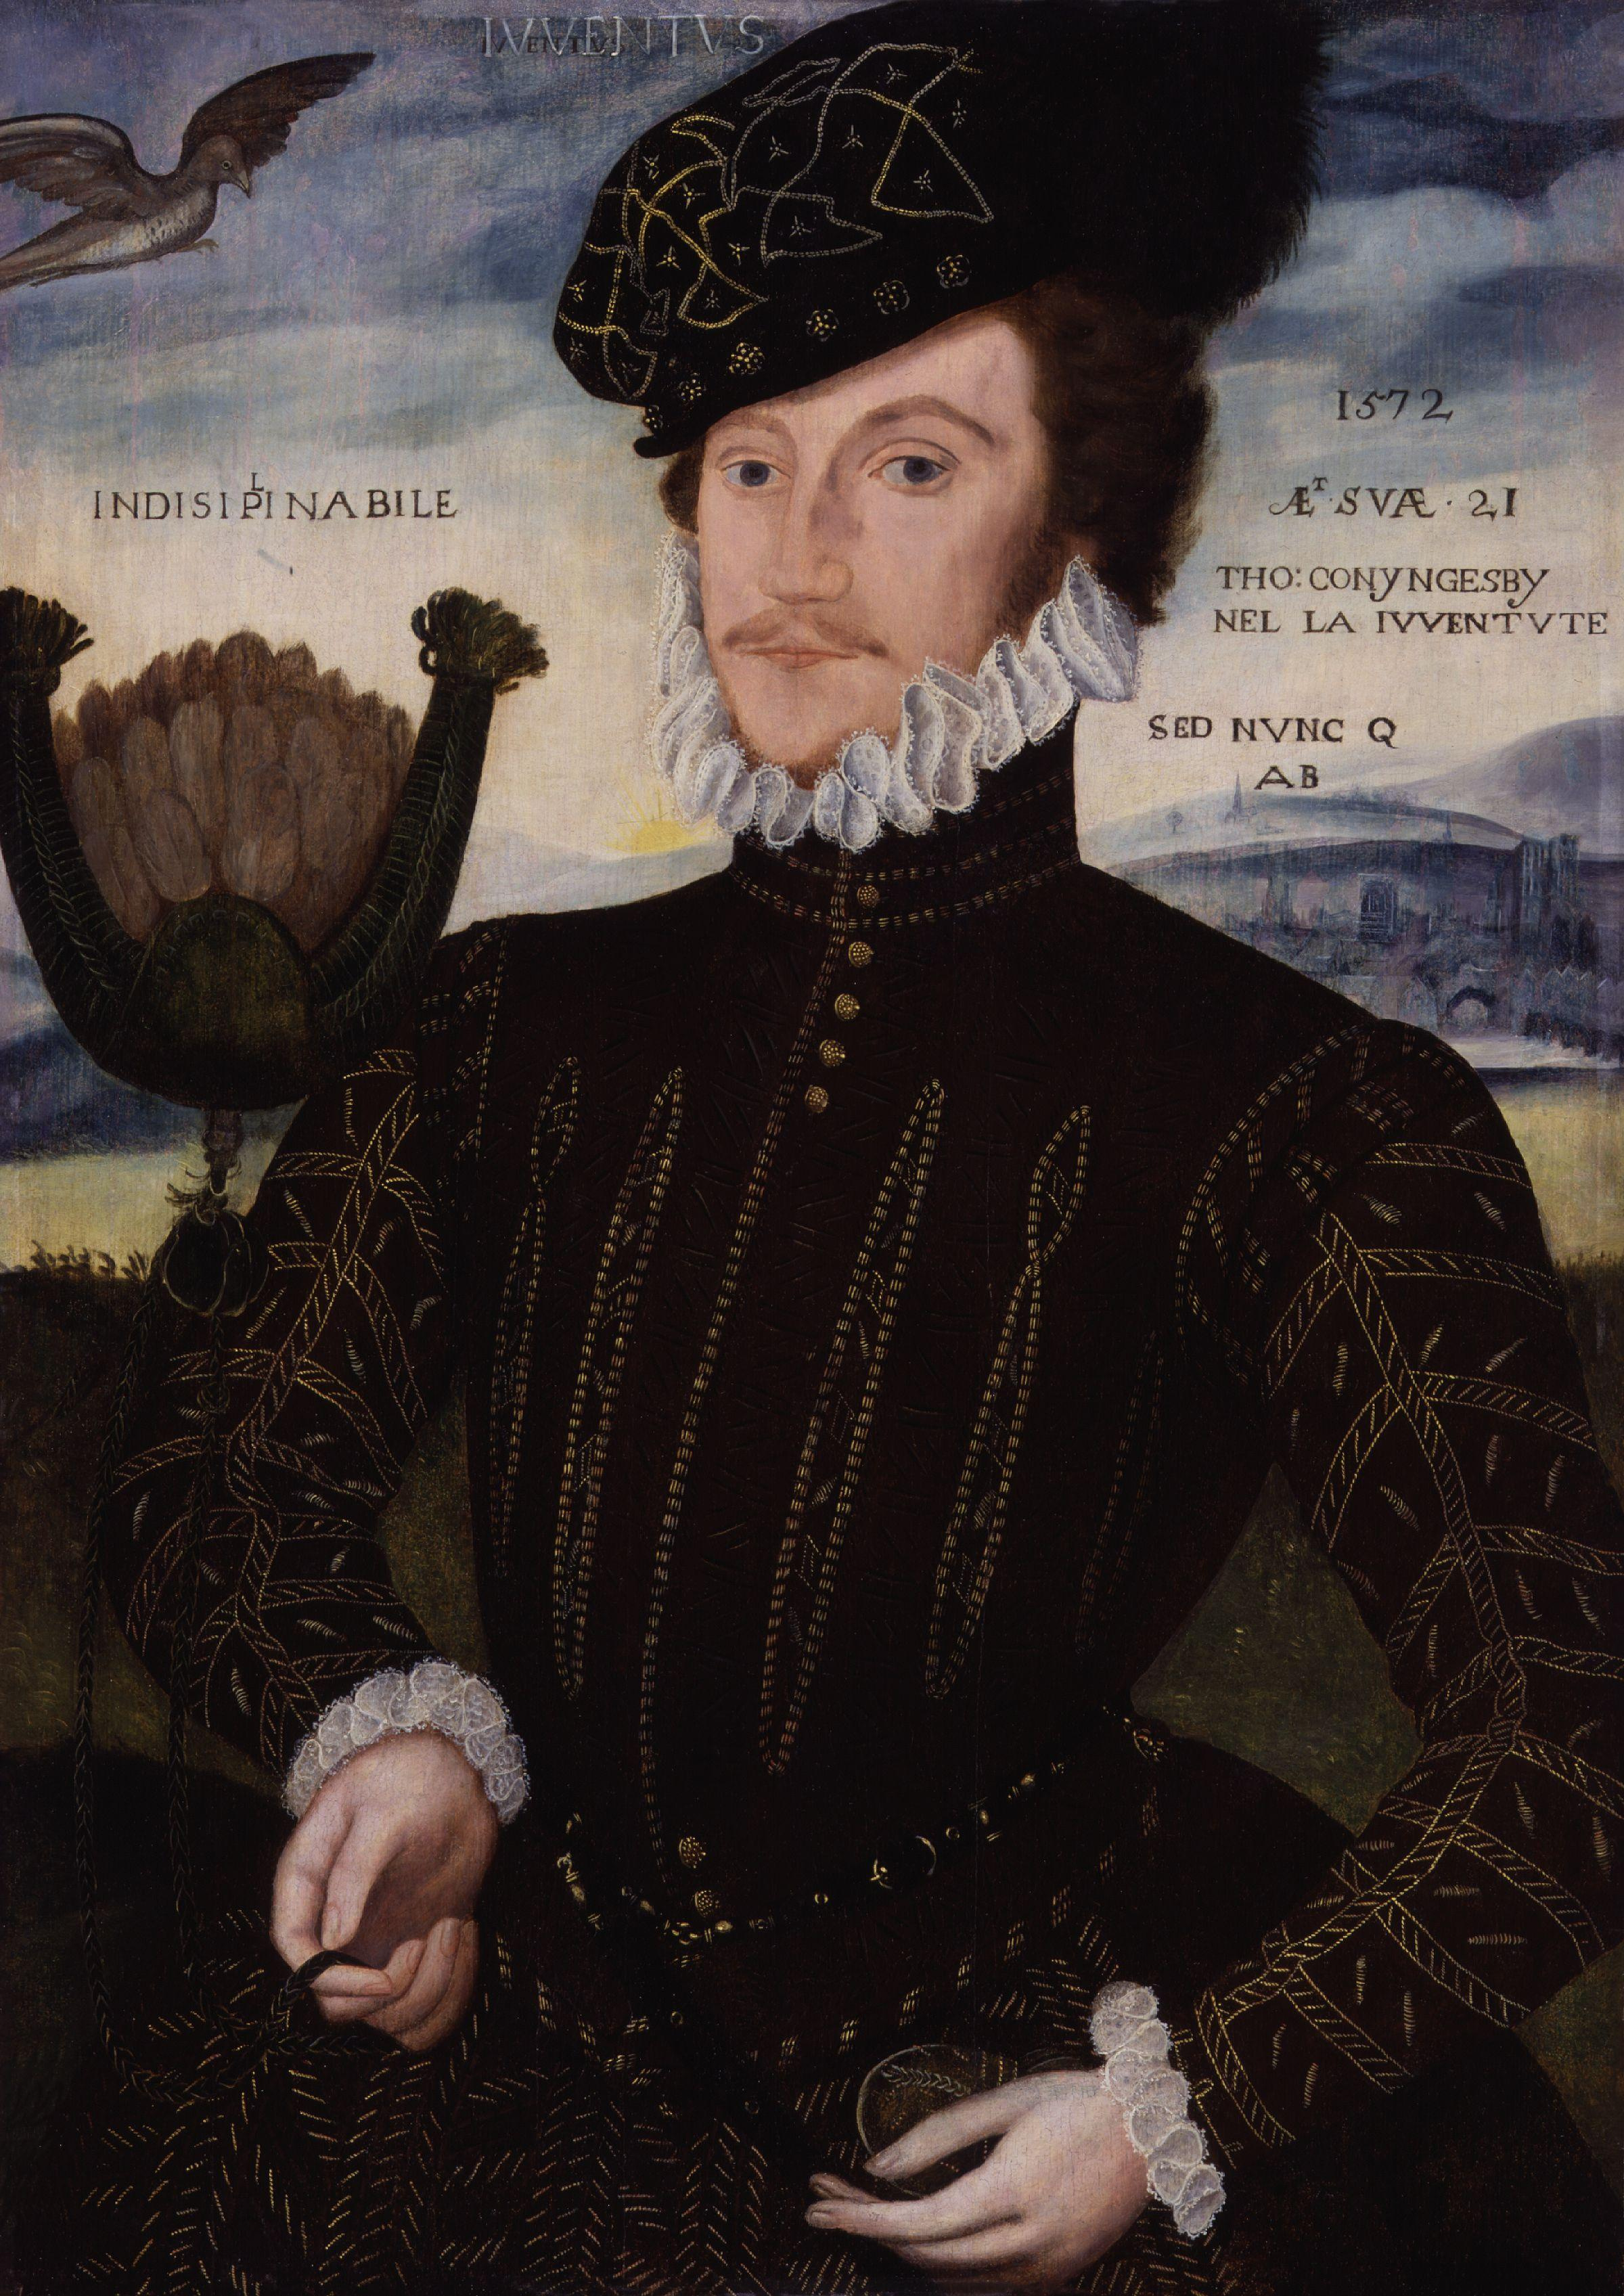 Sir Thomas Coningsby by George Gower, National Portrait Gallery